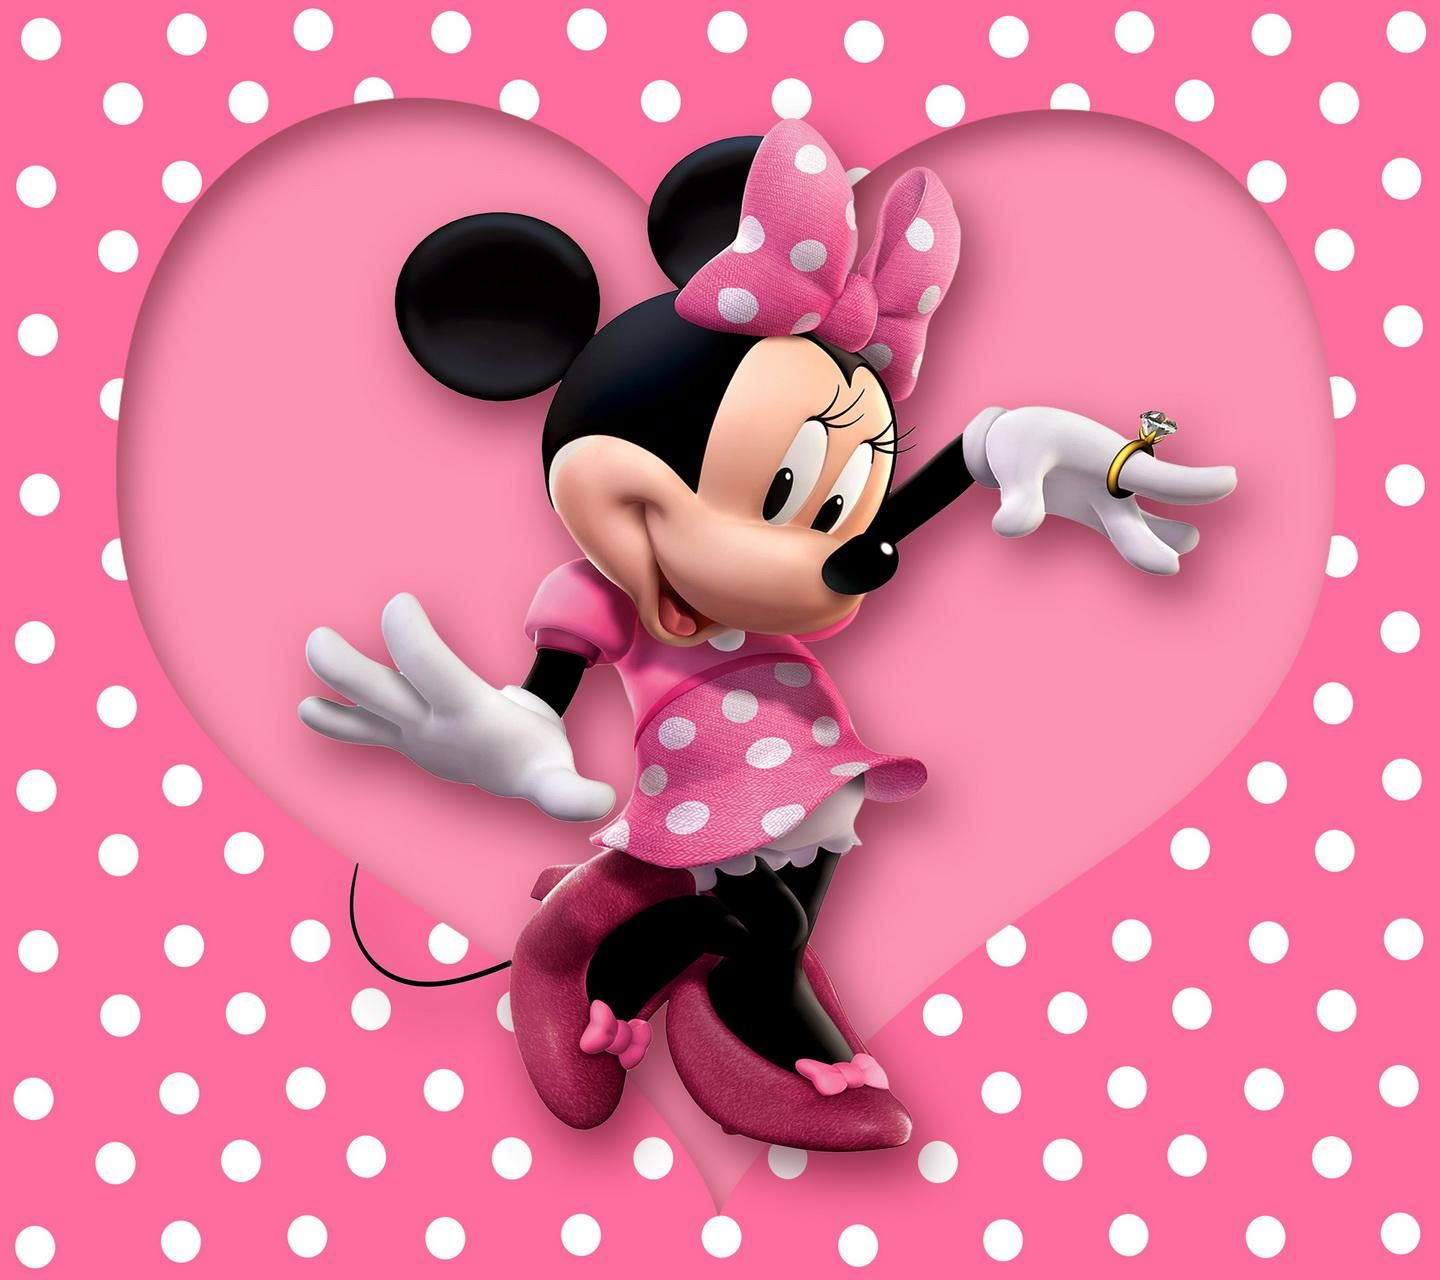 Download Minnie Mouse Wallpaper by _MARIKA_ now. Browse millions of popu. Minnie mouse image, Minnie mouse cartoons, Mickey mouse wallpaper